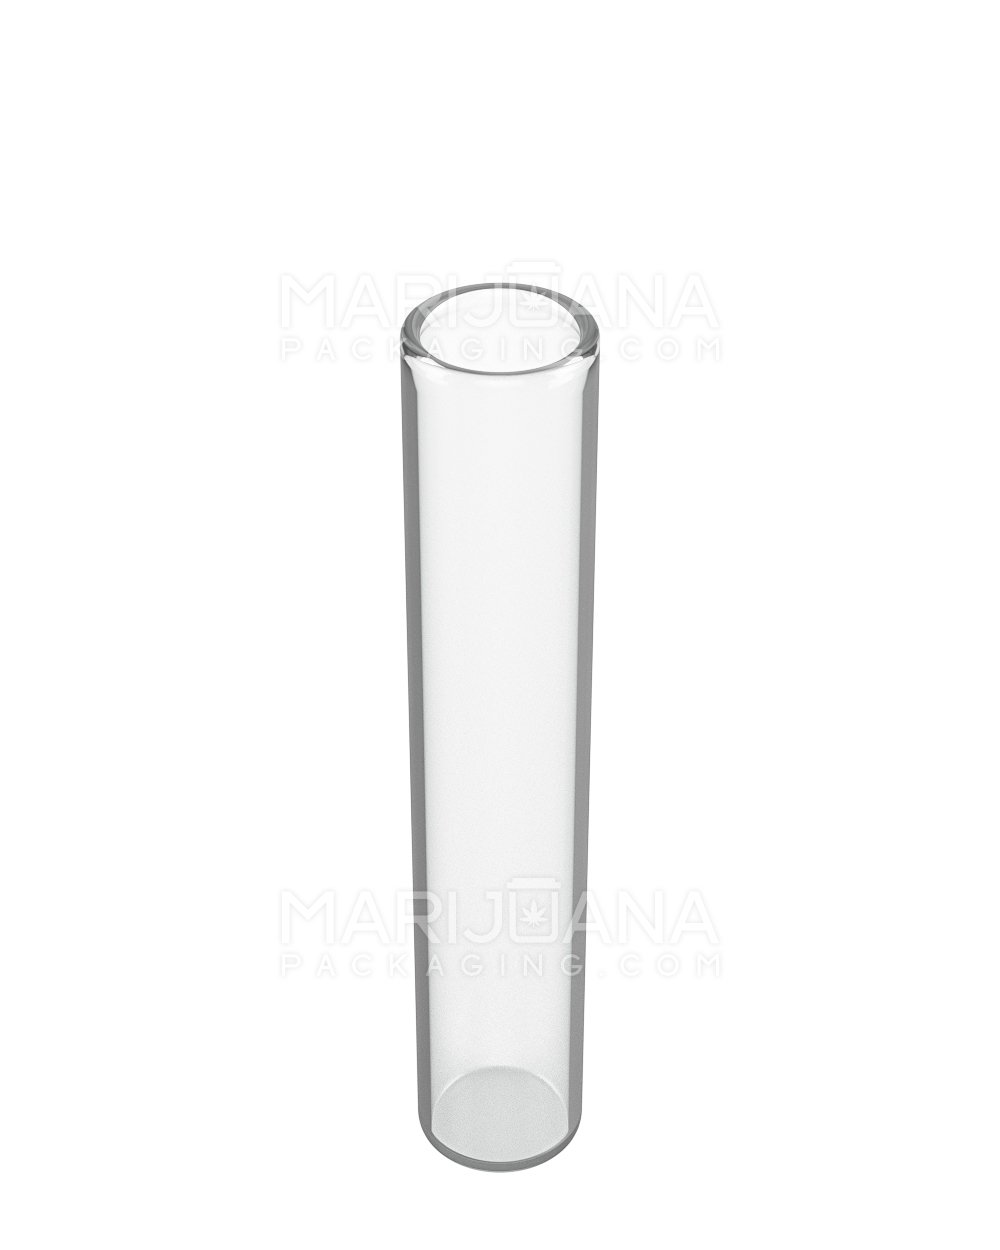 Glass Pre-Roll Tube with Cork Top | 120mm - Clear Glass - 570 Count - 6